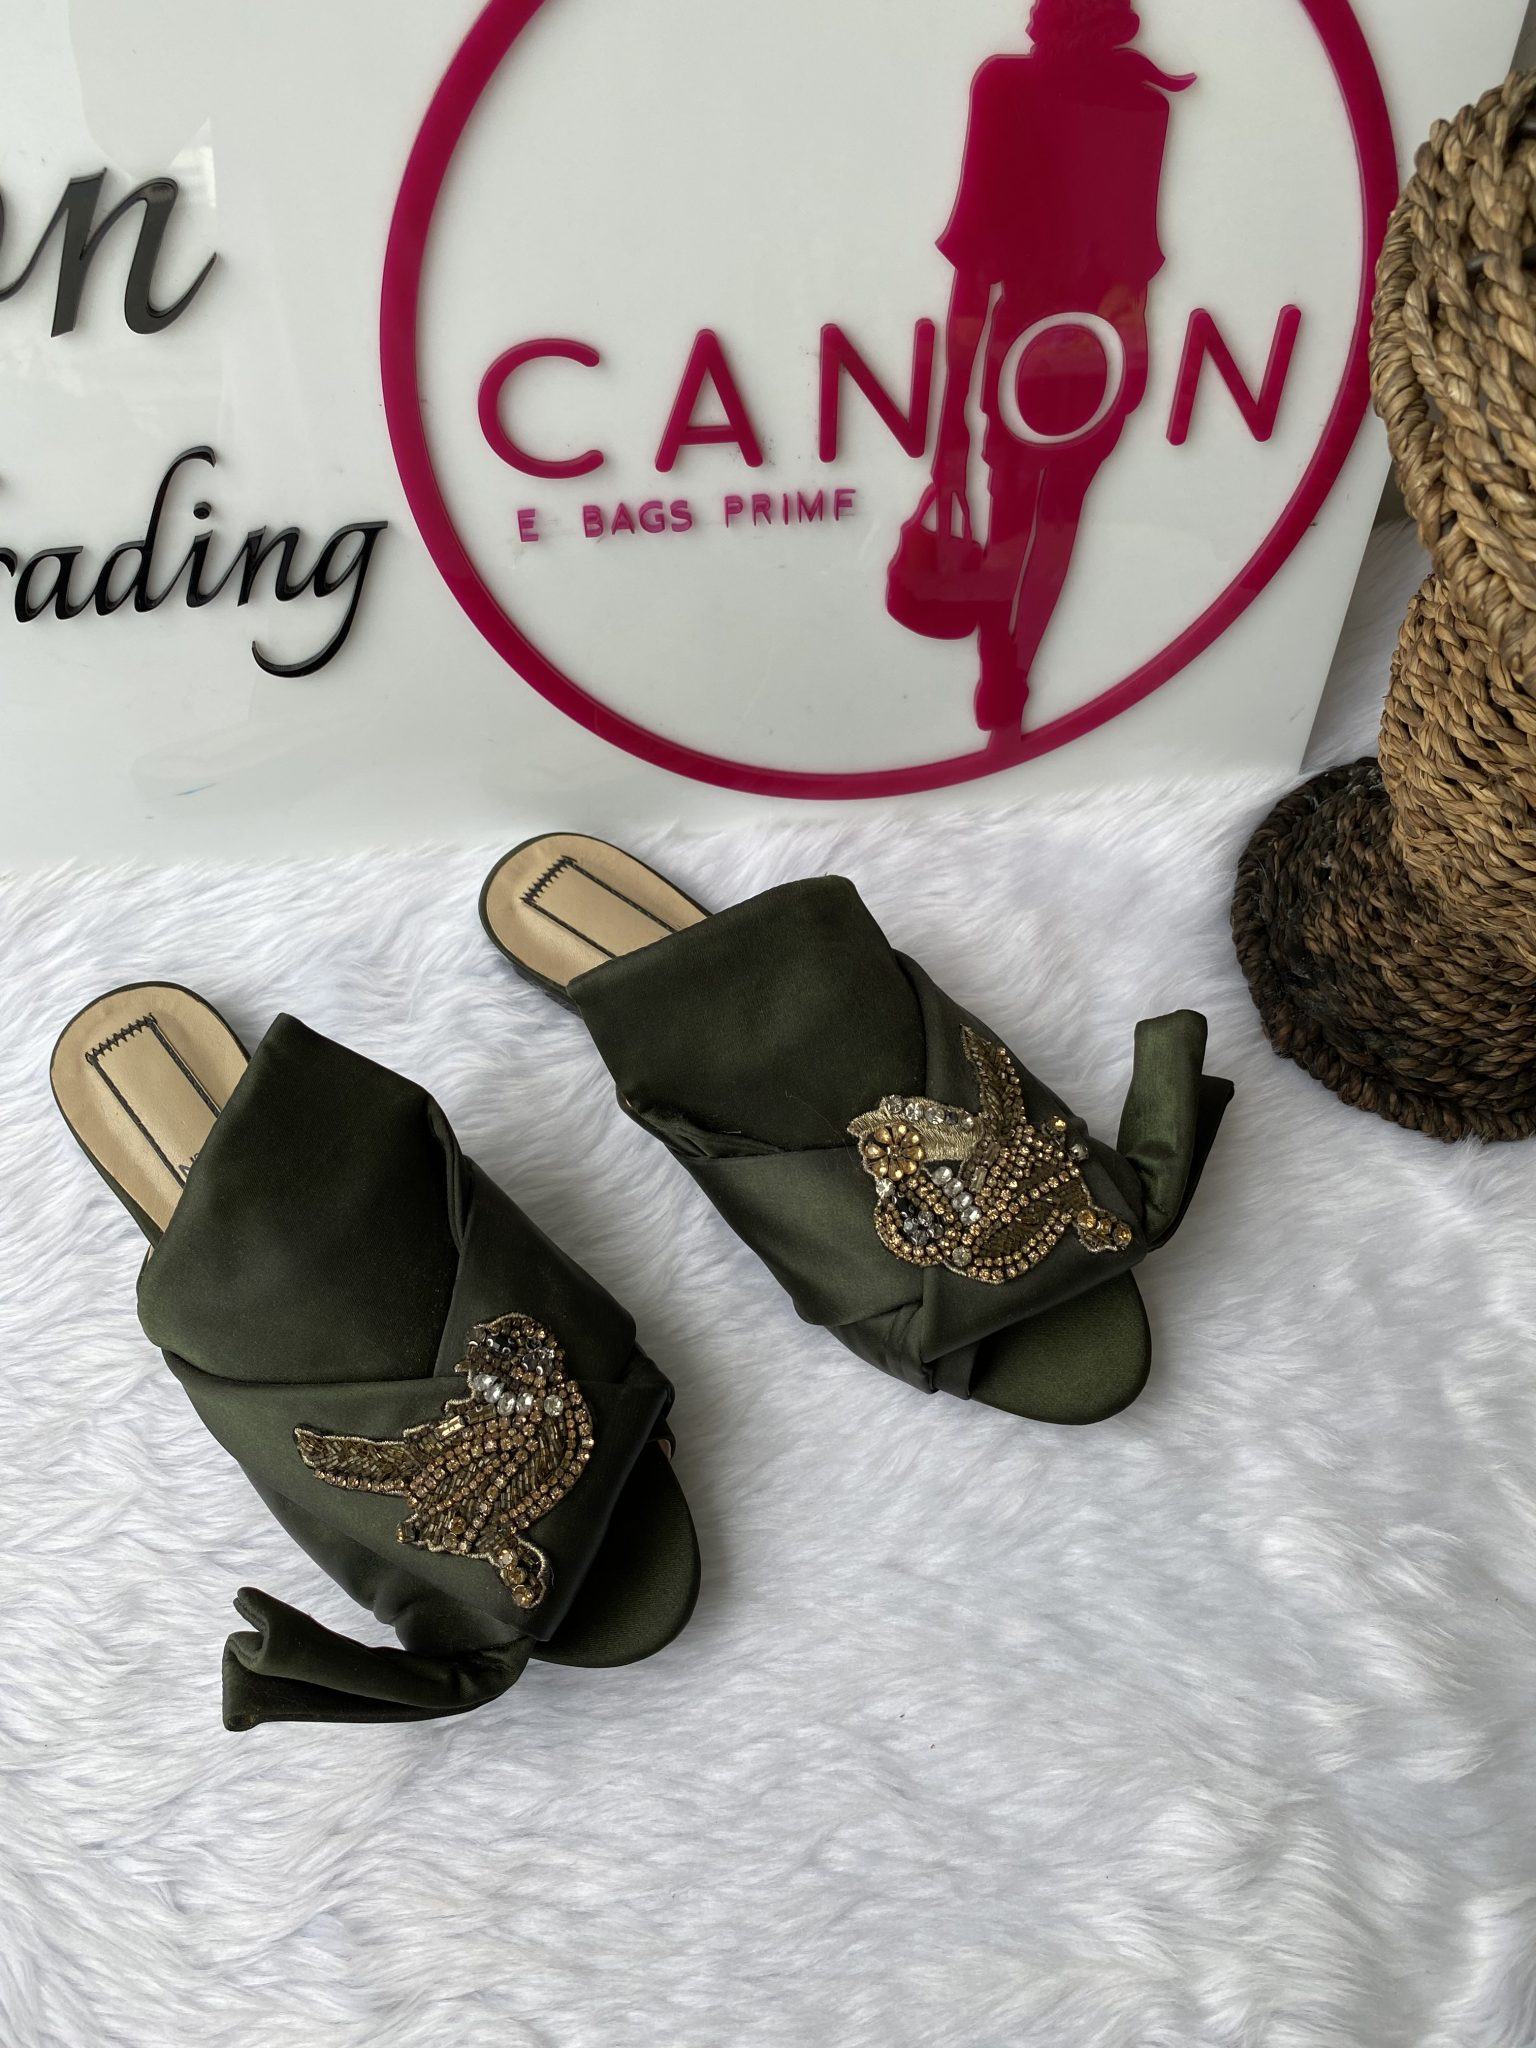 N21 Bow Embellished Slippers Green Size 39. – Canon E-Bags Prime